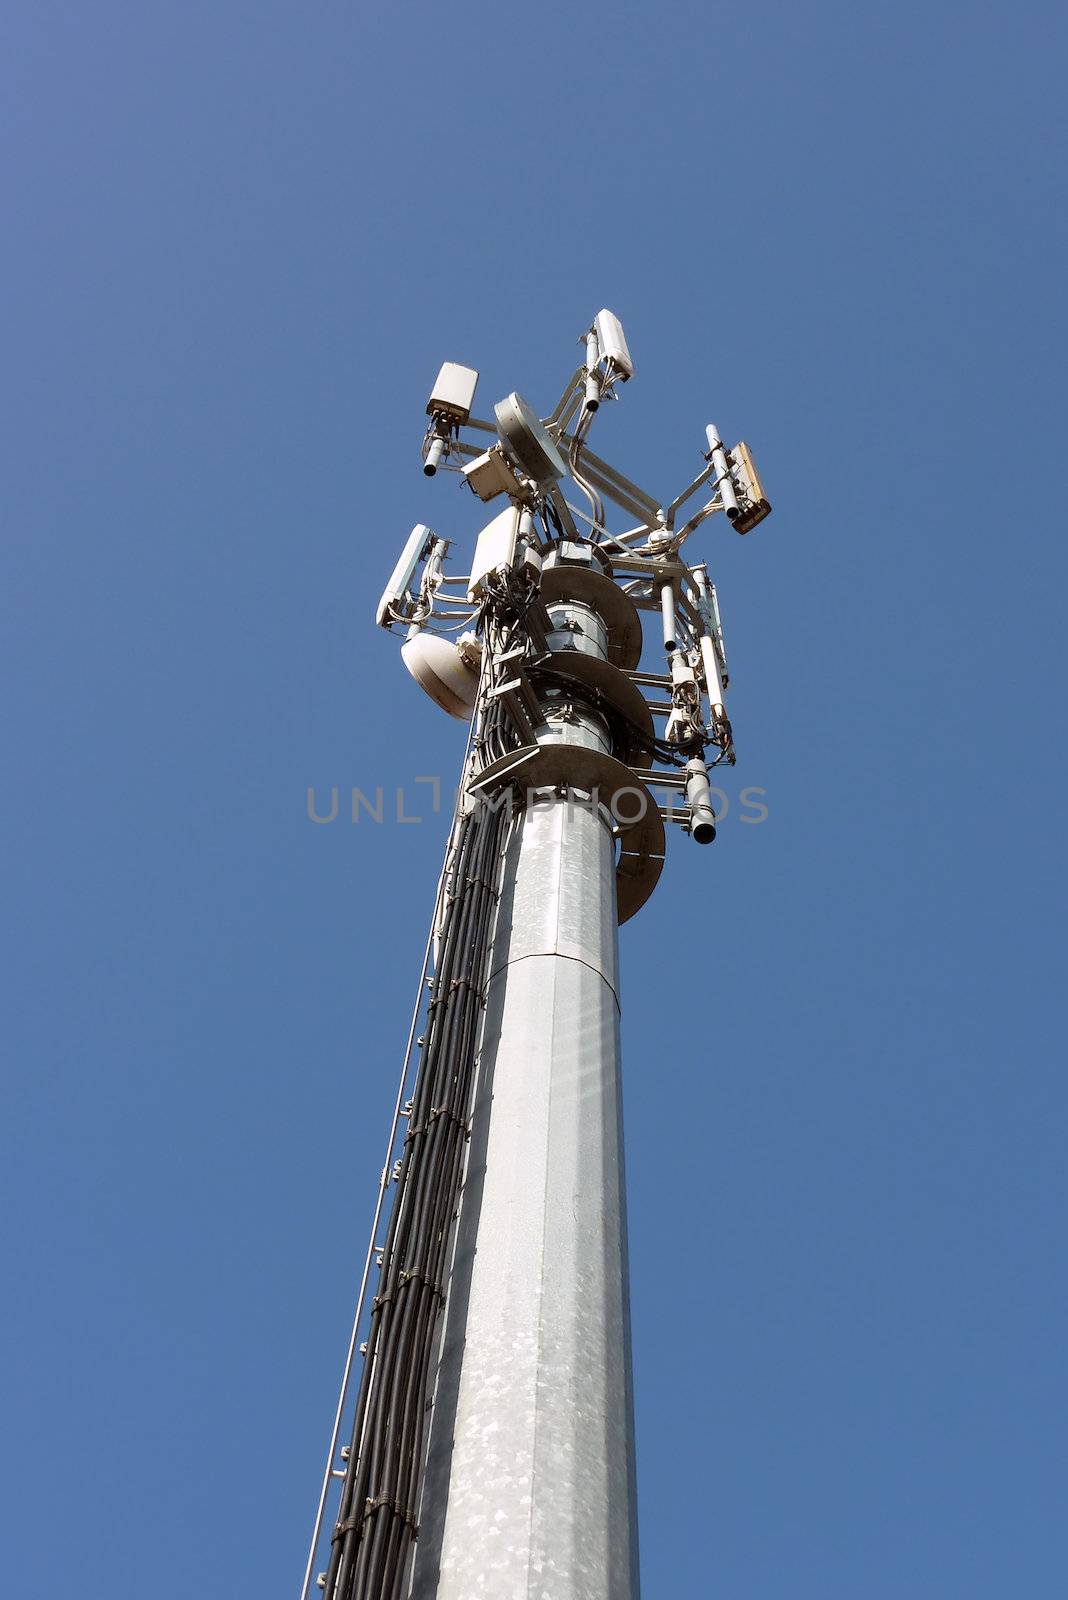 View of communication tower in cloudless blue sky